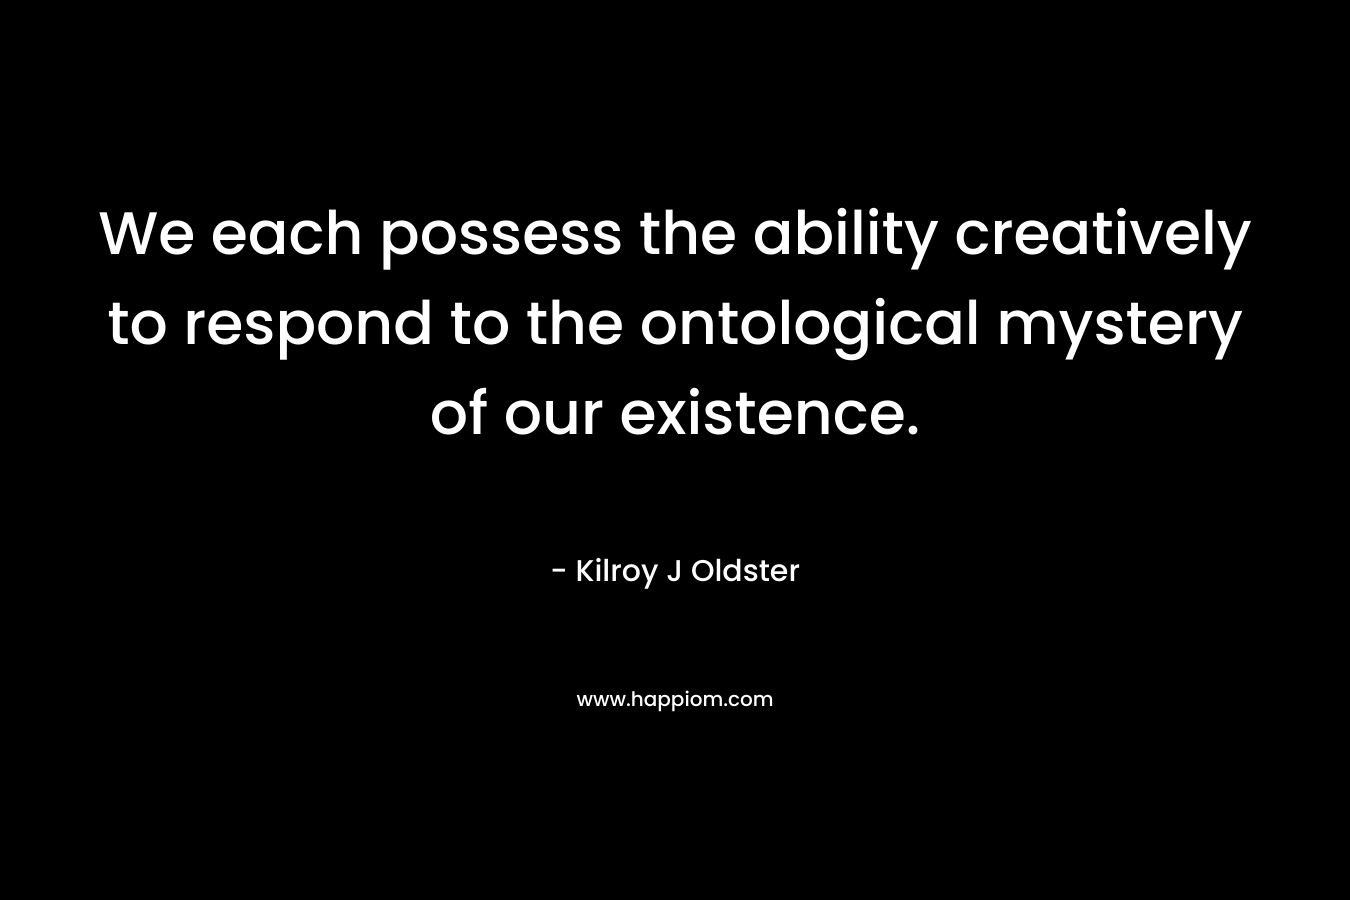 We each possess the ability creatively to respond to the ontological mystery of our existence.